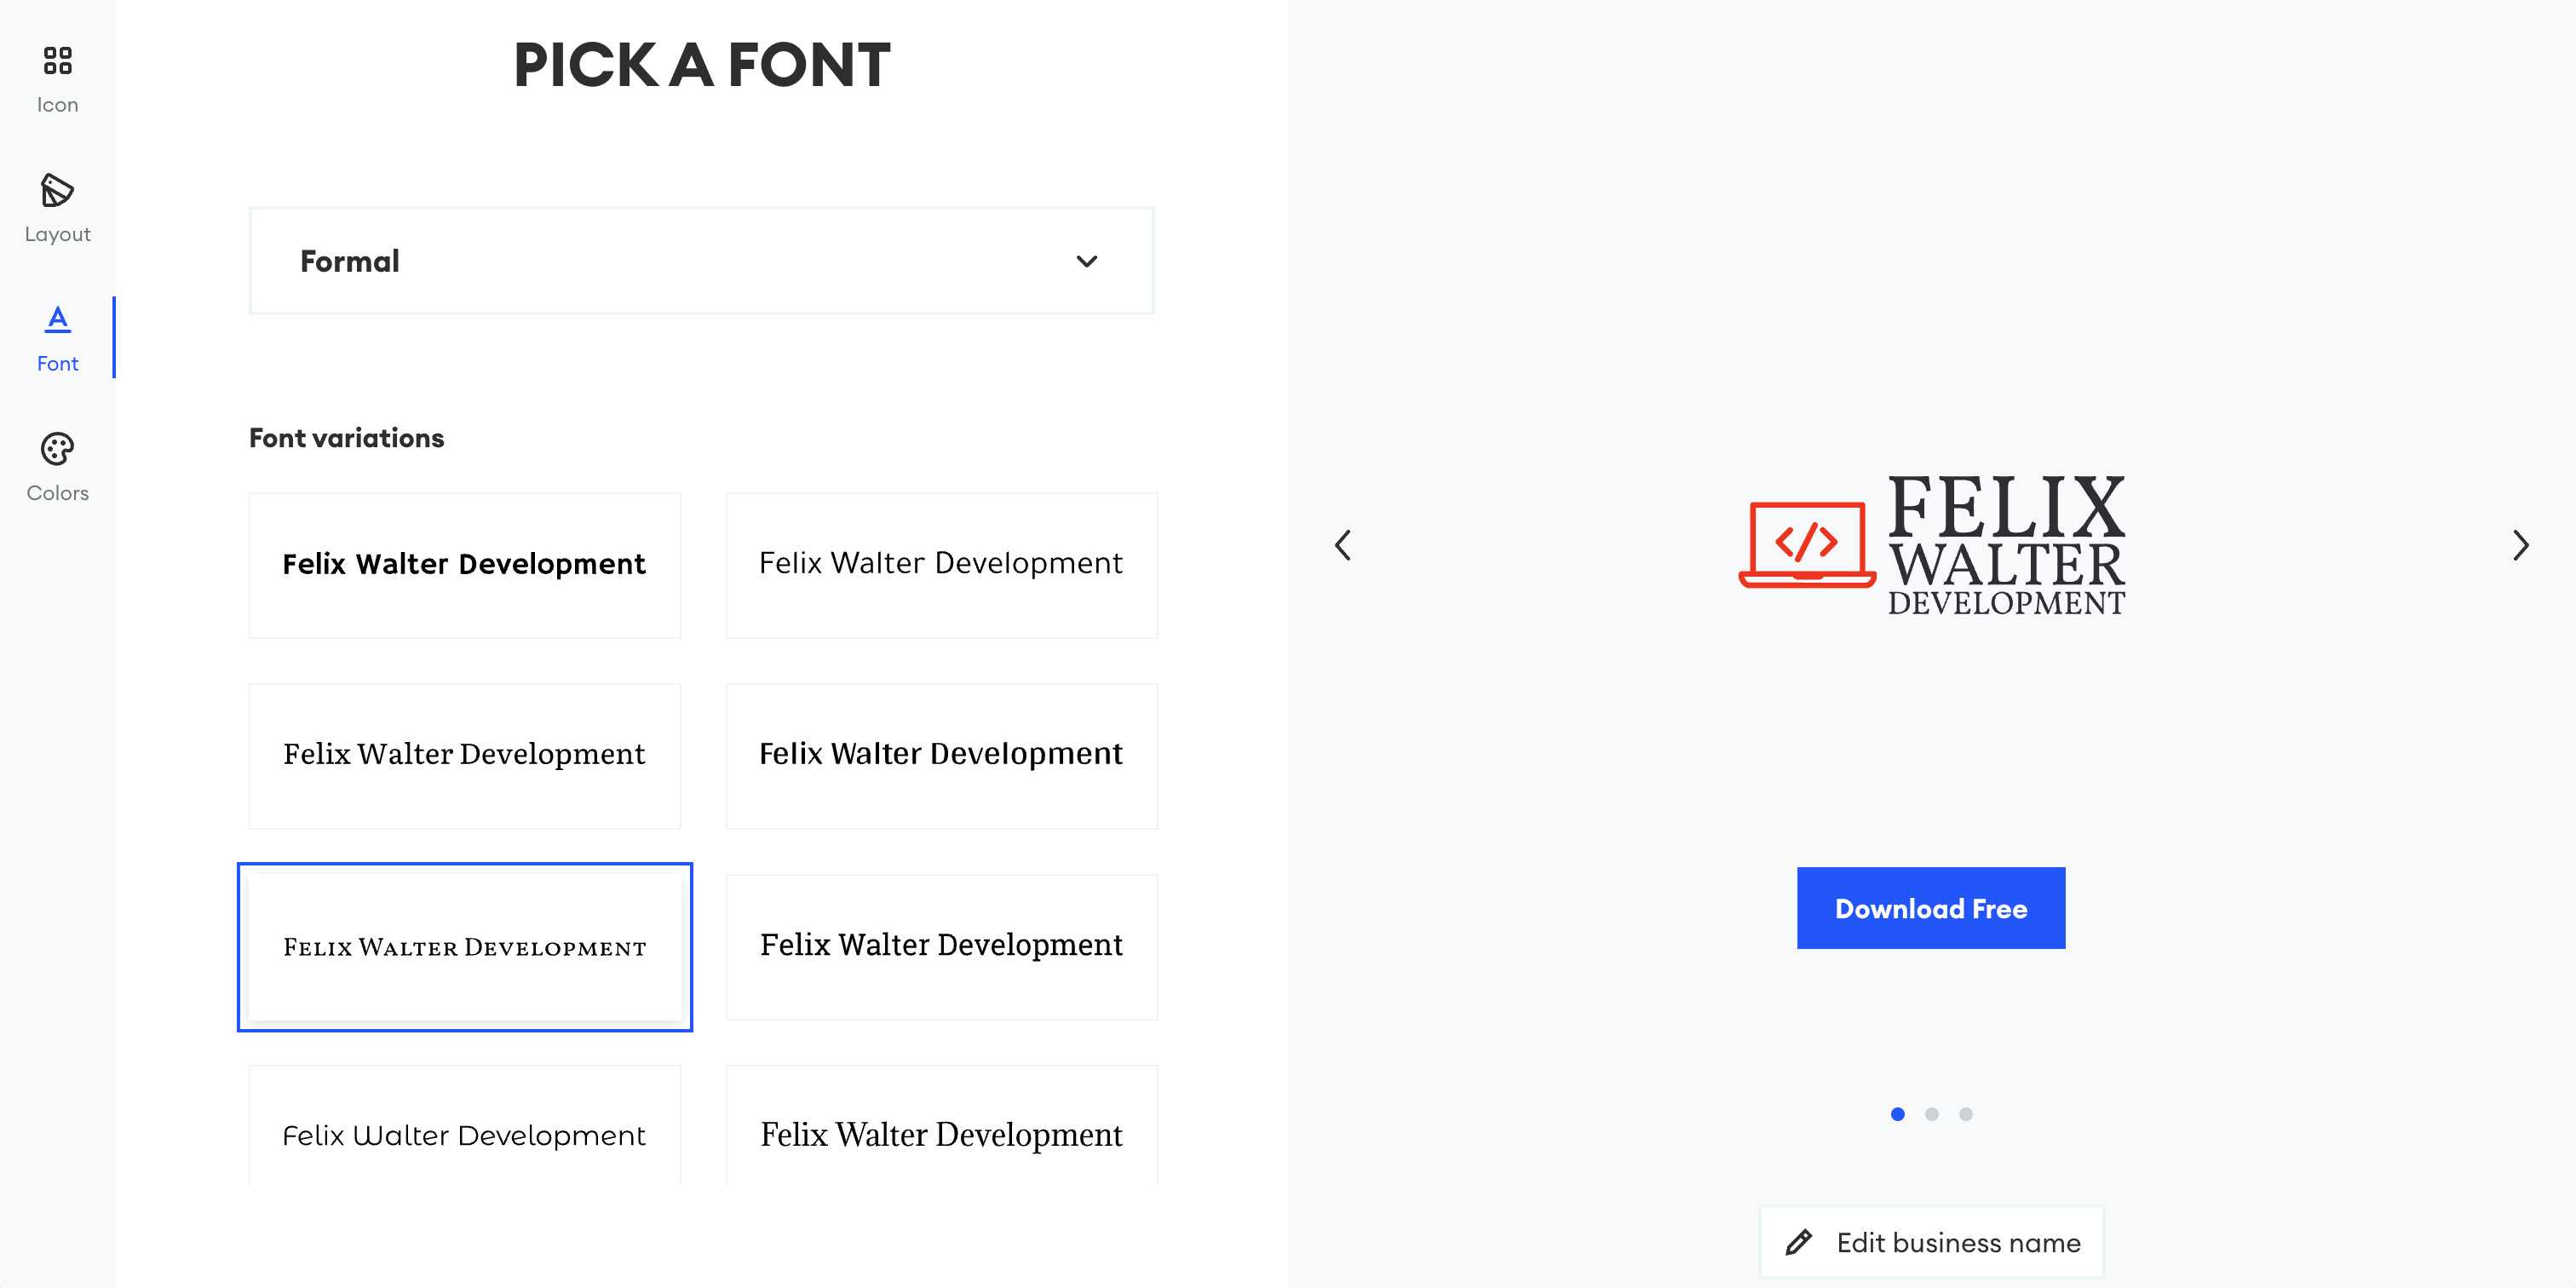 Multiple font options categorized by style